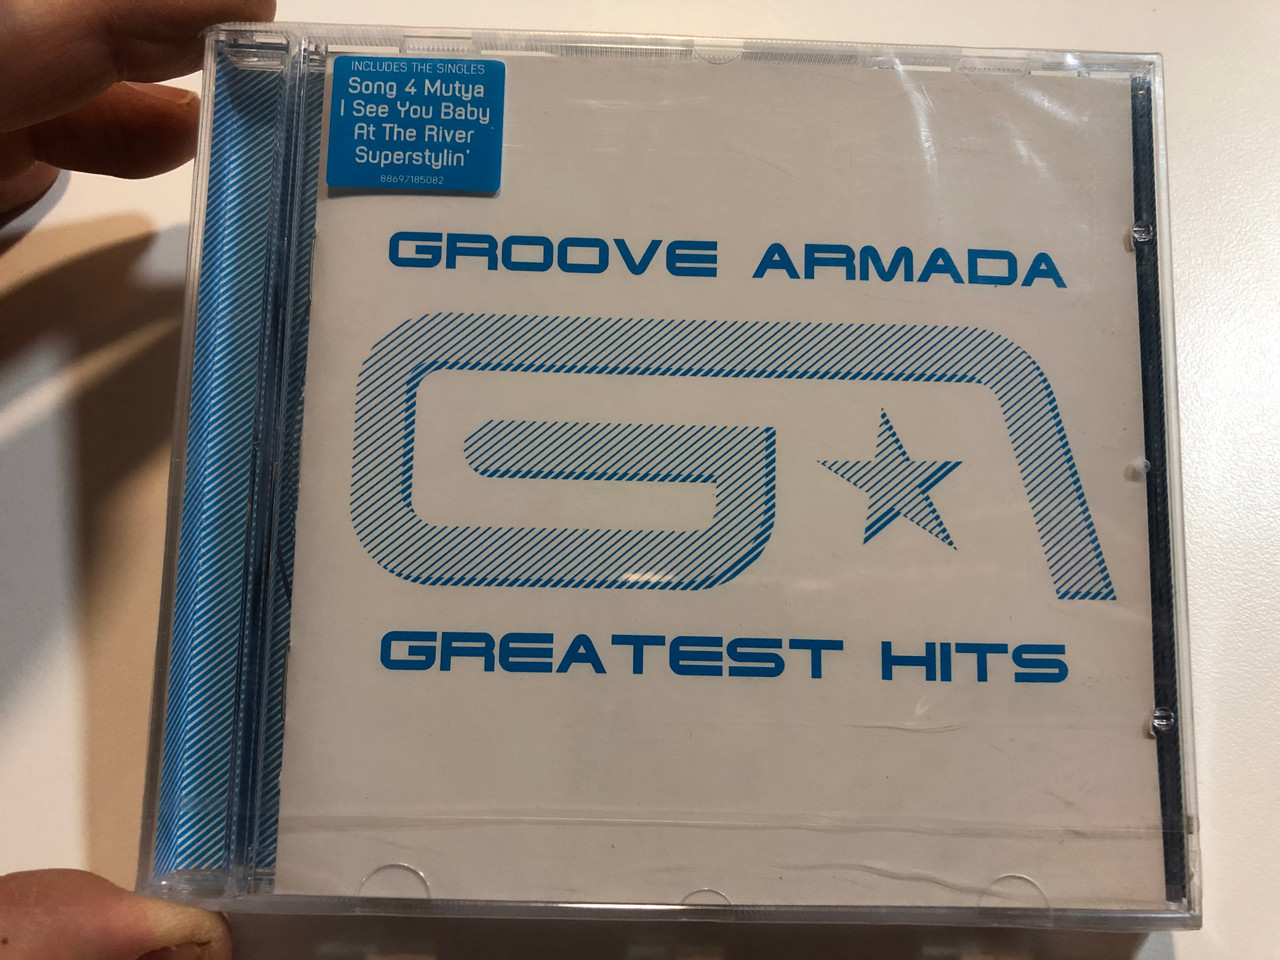 https://cdn10.bigcommerce.com/s-62bdpkt7pb/products/31119/images/183226/Groove_Armada_Greatest_Hits_Includes_The_Singles_Song_4_Mutya_I_See_You_Baby_At_The_River_Superstylin_Sony_BMG_Music_Entertainment_Audio_CD_2007_88697185082_1__19799.1625211625.1280.1280.JPG?c=2